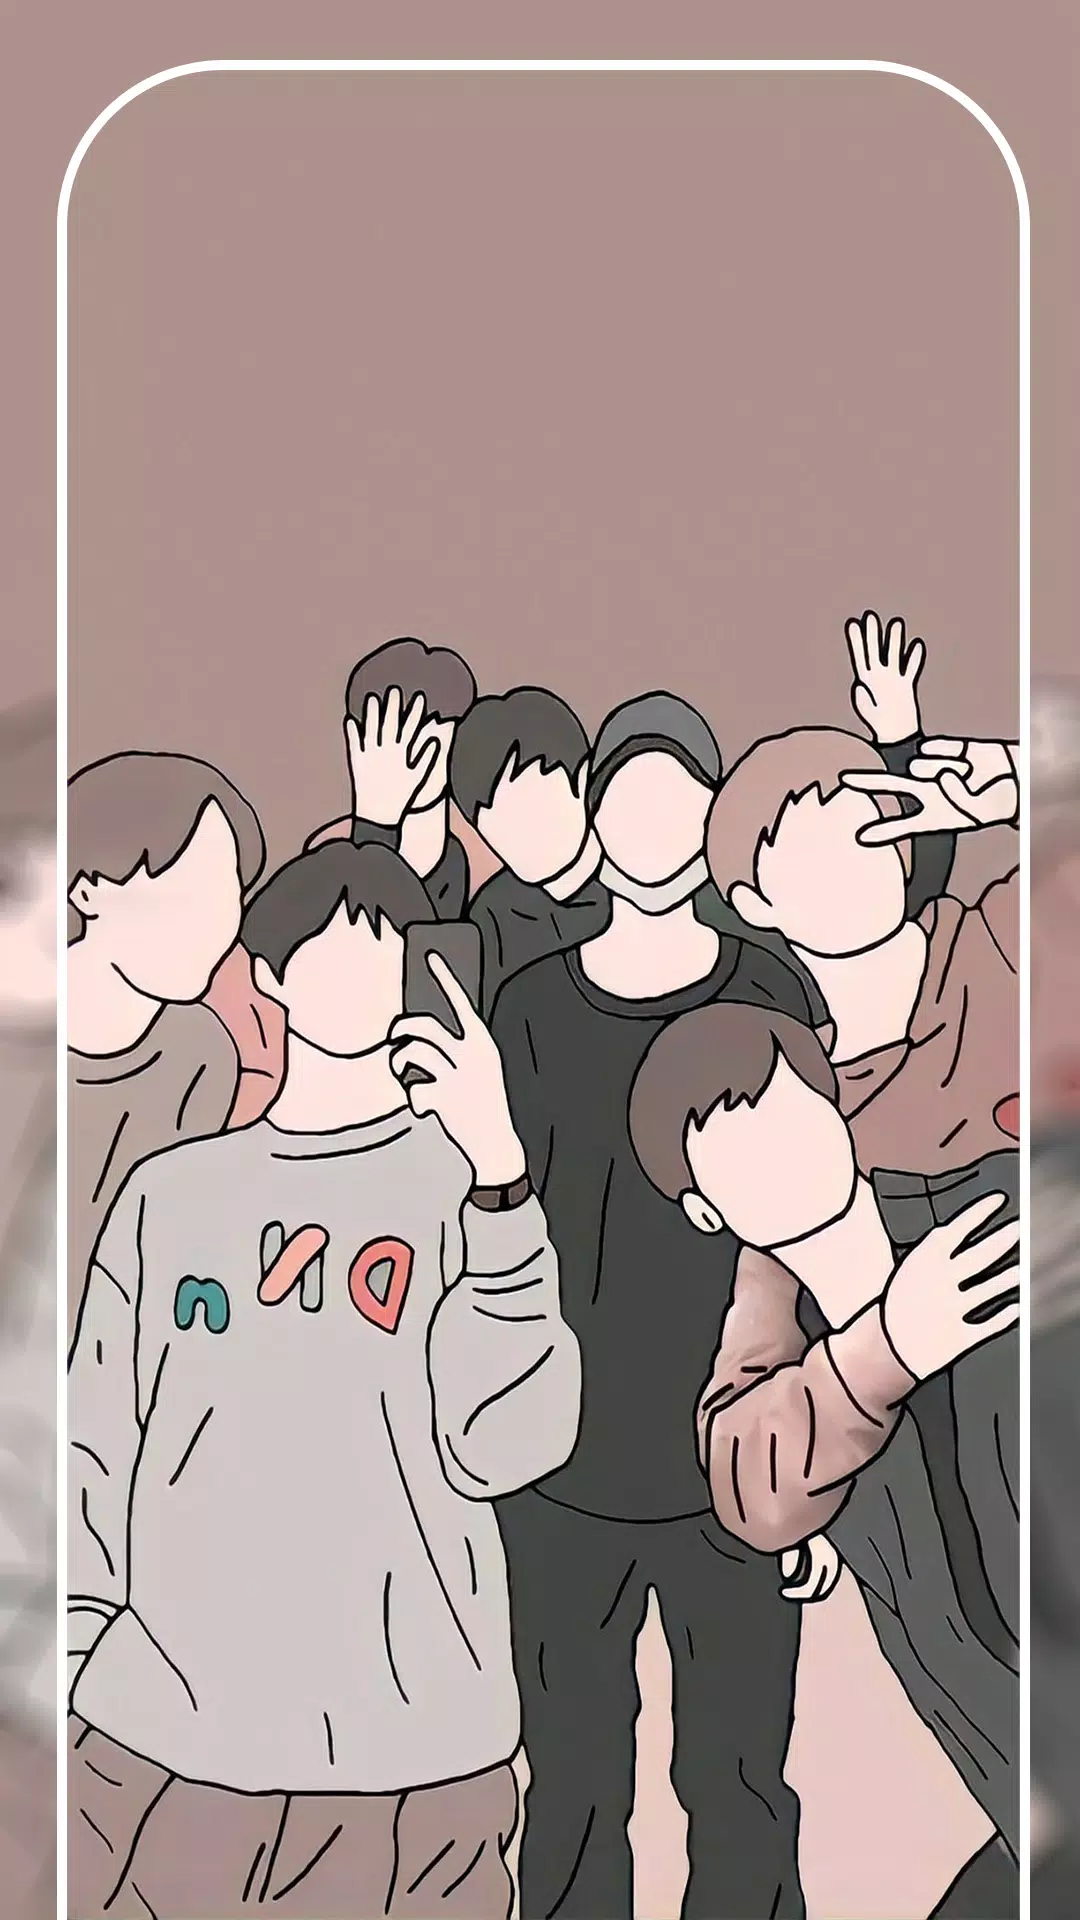 This is a cartoon picture of a group of people with their hands in the shape of a V. - BTS